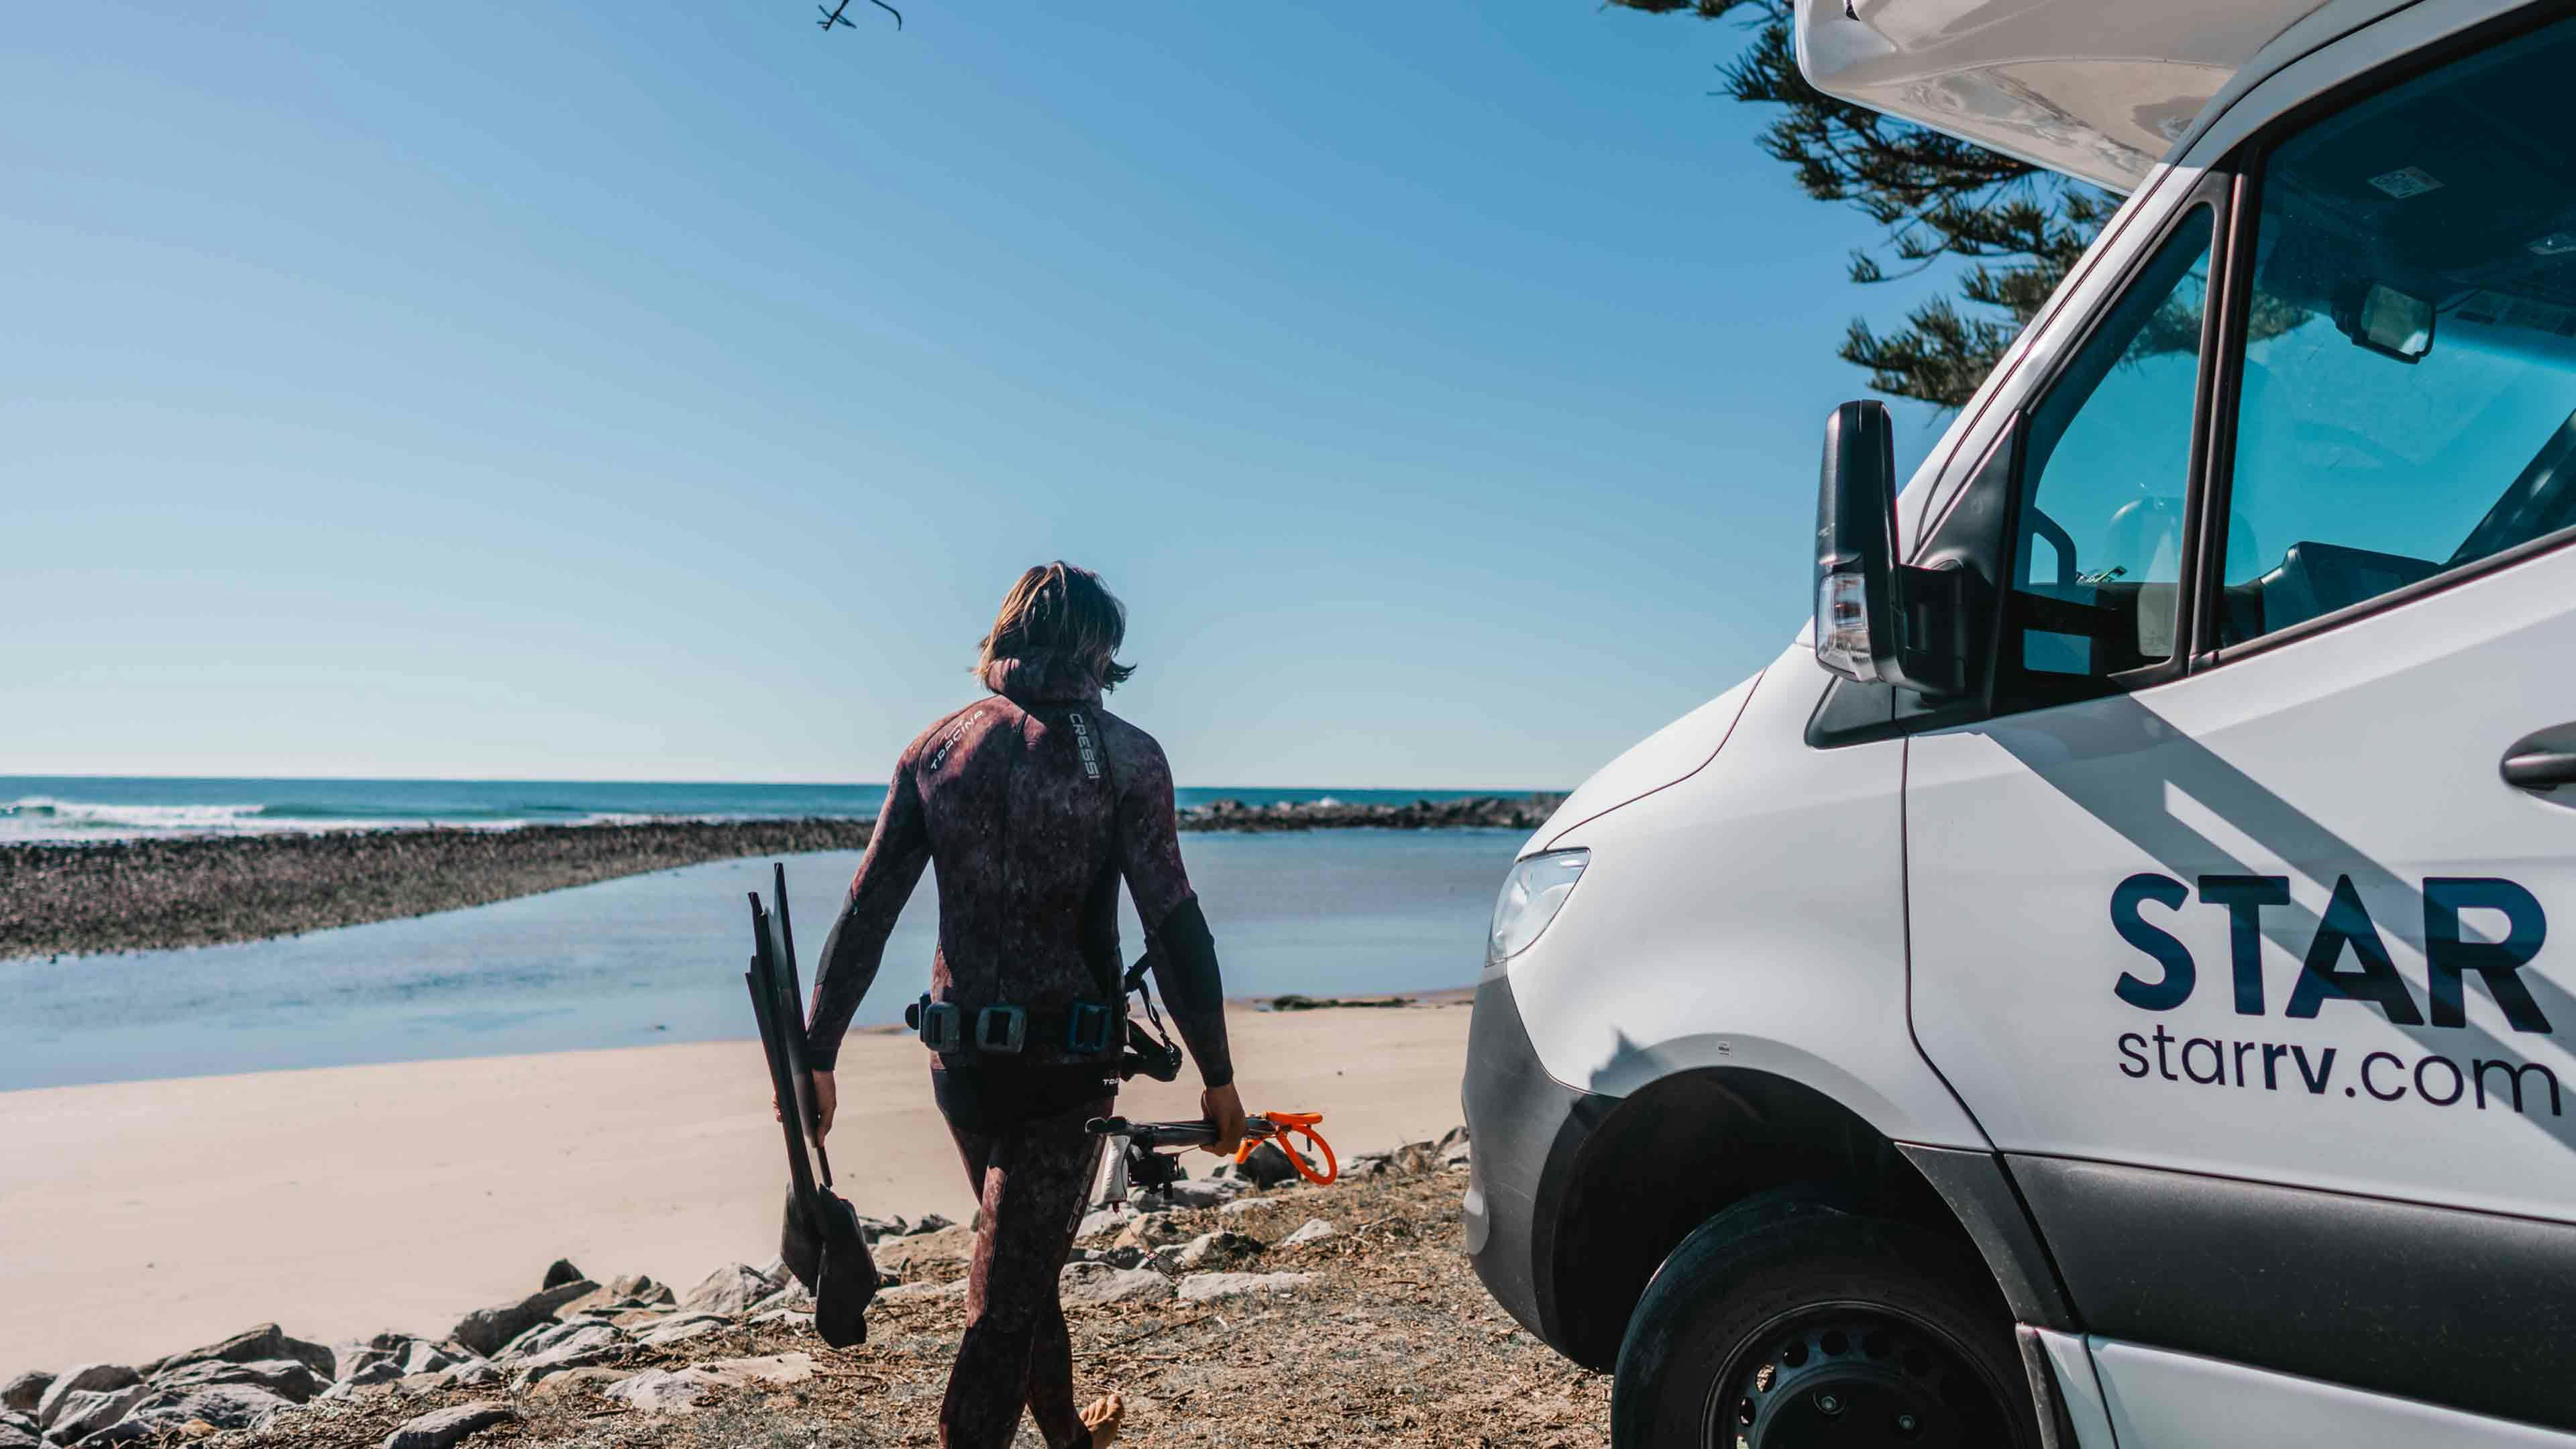 Diver in wetsuit by Star RV motorhome